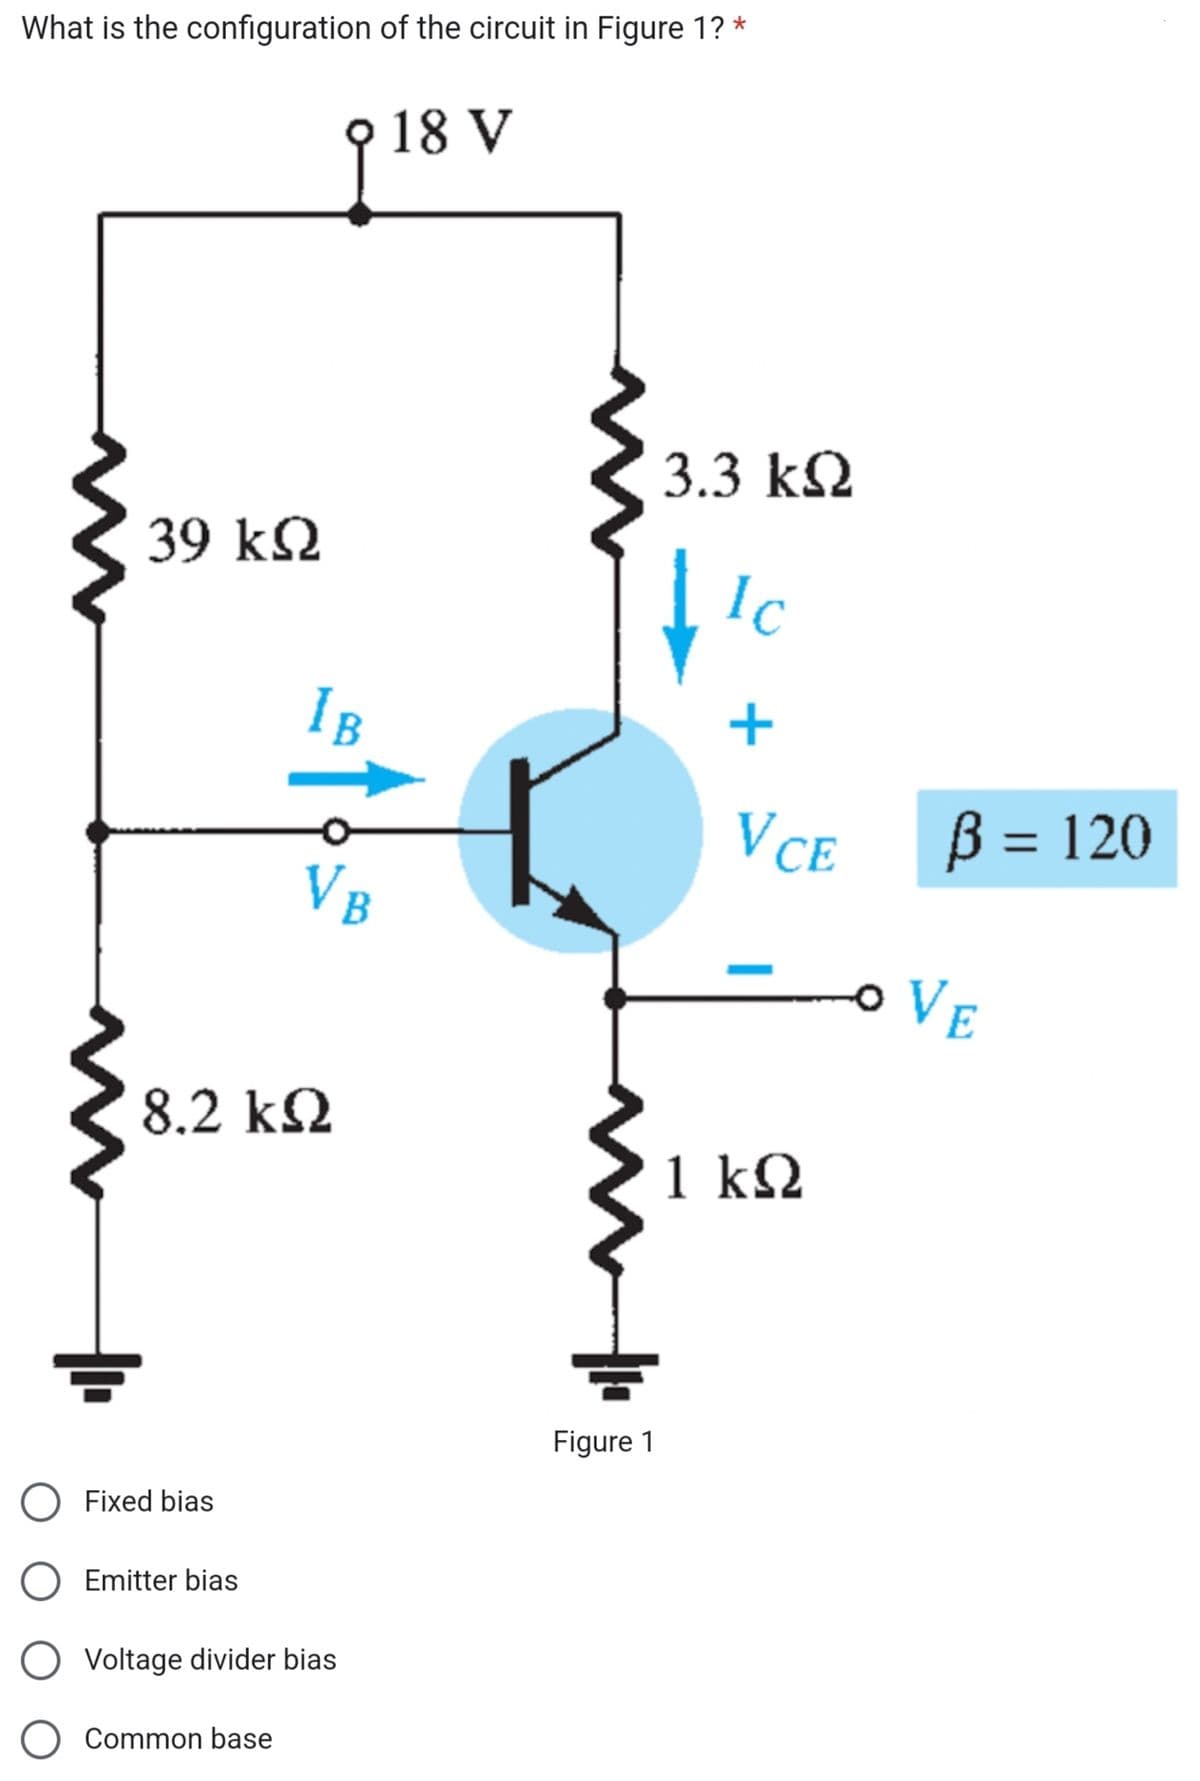 What is the configuration of the circuit in Figure 1? *
39 ΚΩ
Fixed bias
Emitter bias
IB
8.2 ΚΩ
Common base
fo
V₁
Voltage divider bias
18 V
N
Figure 1
3.3 ΚΩ
Ic
+
VCE
1 ΚΩ
ß = 120
-O VE